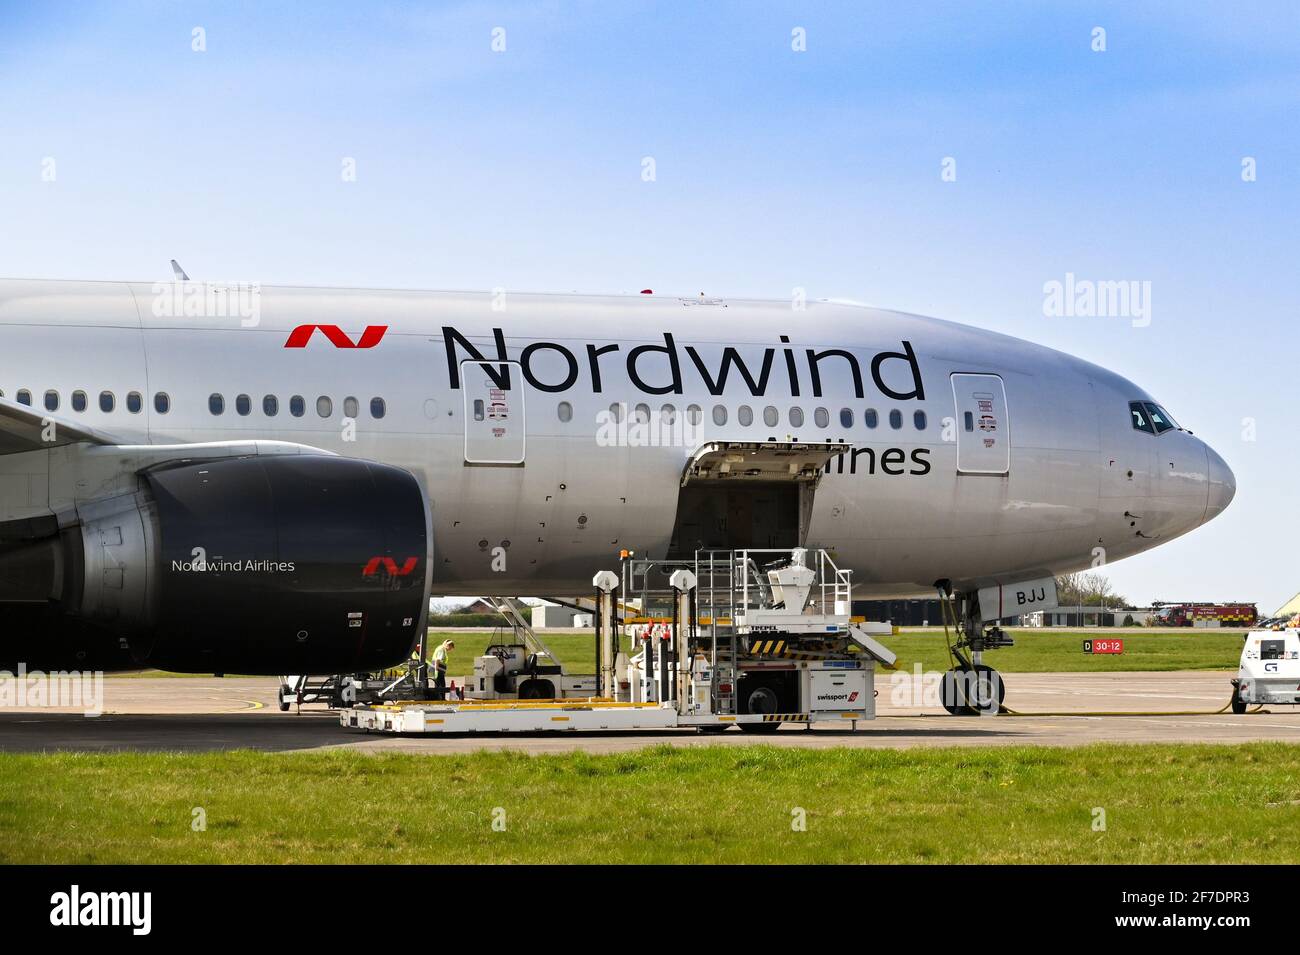 Cardiff, Wales - March 2021: Boeing 777 of Nordwind Airlines (registraion VP-BJJ) with pallet loader for unloading air freight at Cardiff Airport Stock Photo